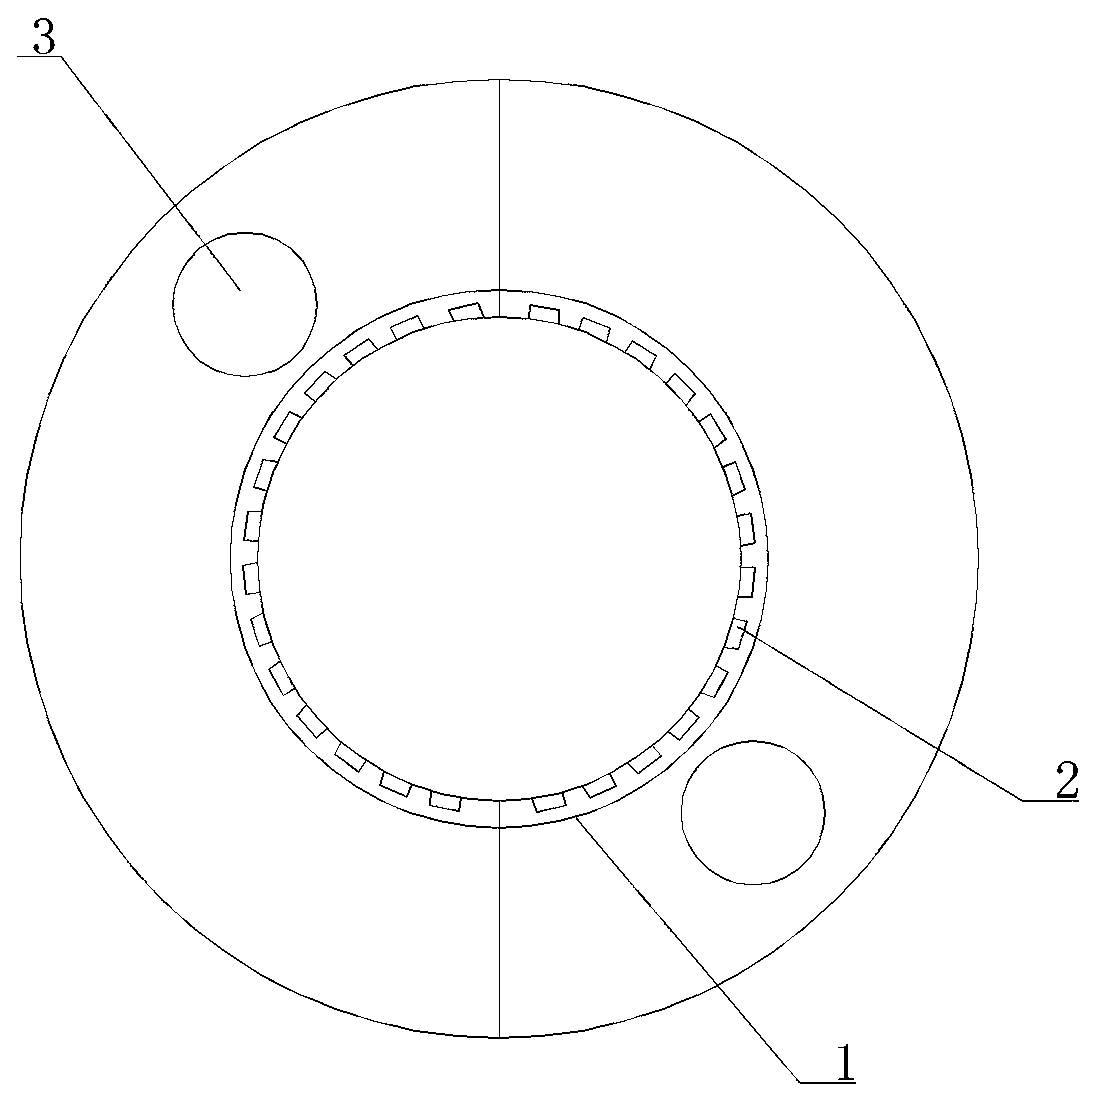 Distributed arc motor